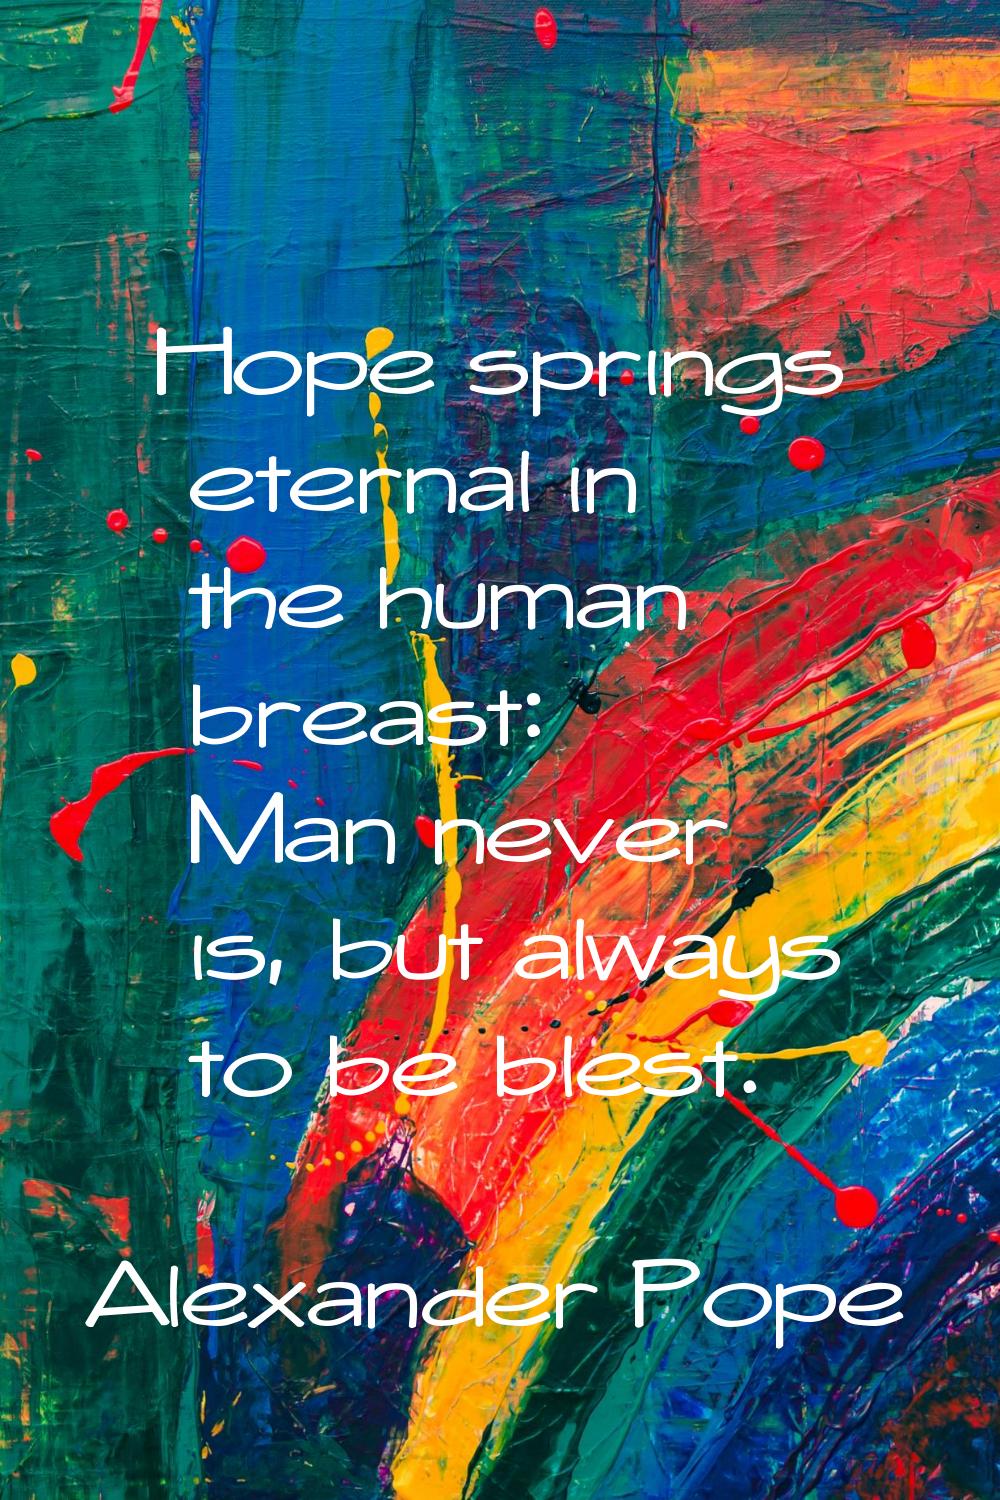 Hope springs eternal in the human breast: Man never is, but always to be blest.